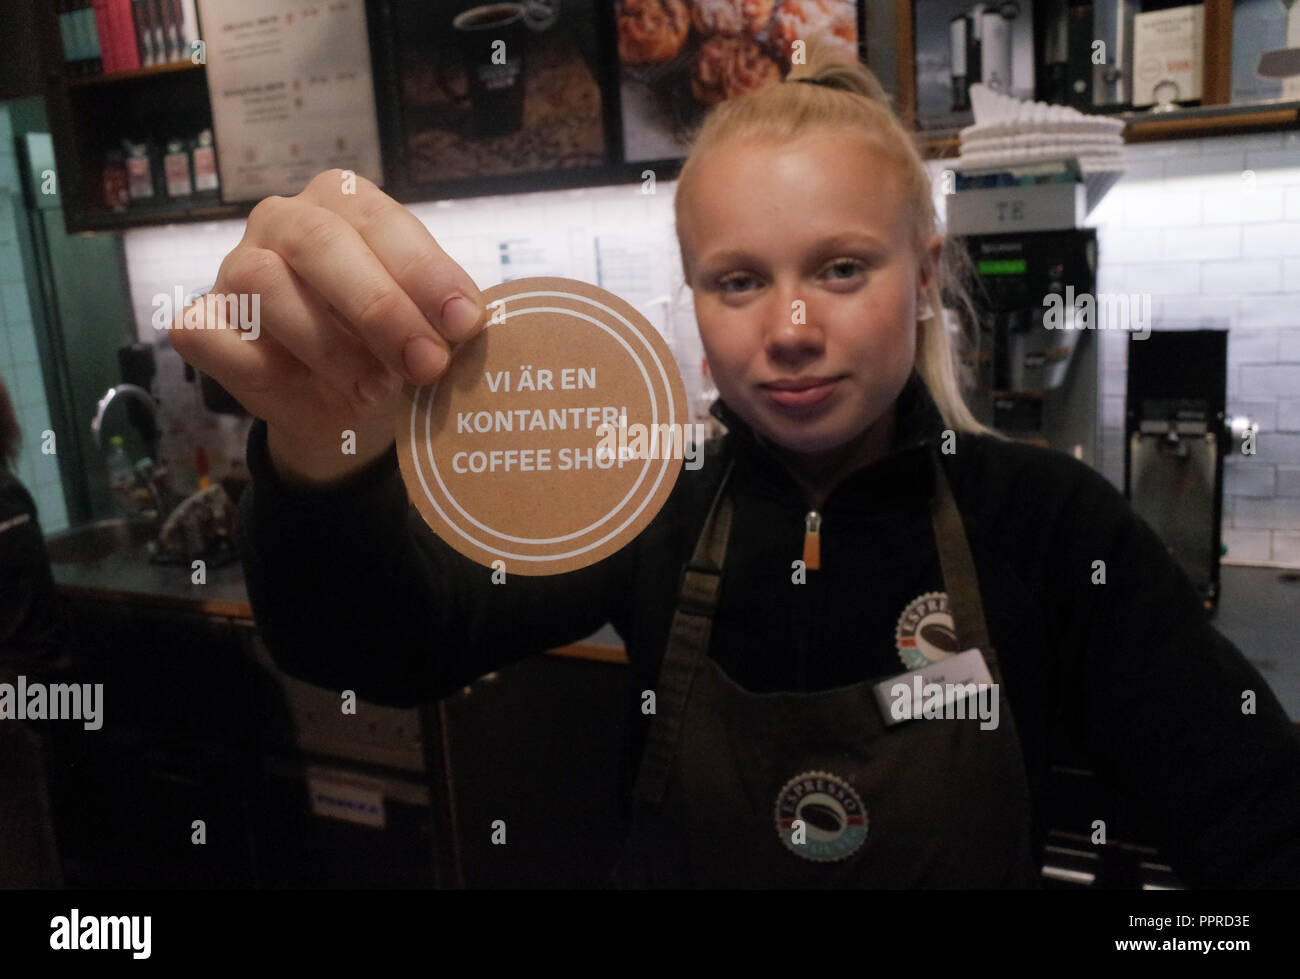 September 26, 2018 - Stockholm, Sweden: An employee of Expresso House shows a sign in Swedish language that means 'We Are a Cashless Coffee shop'. Sweden is the most cashless society on the planet, with 80% of all transactions in made with bank cards or mobile phone apps. *** FRANCE OUT / NO SALES TO FRENCH MEDIA *** Stock Photo